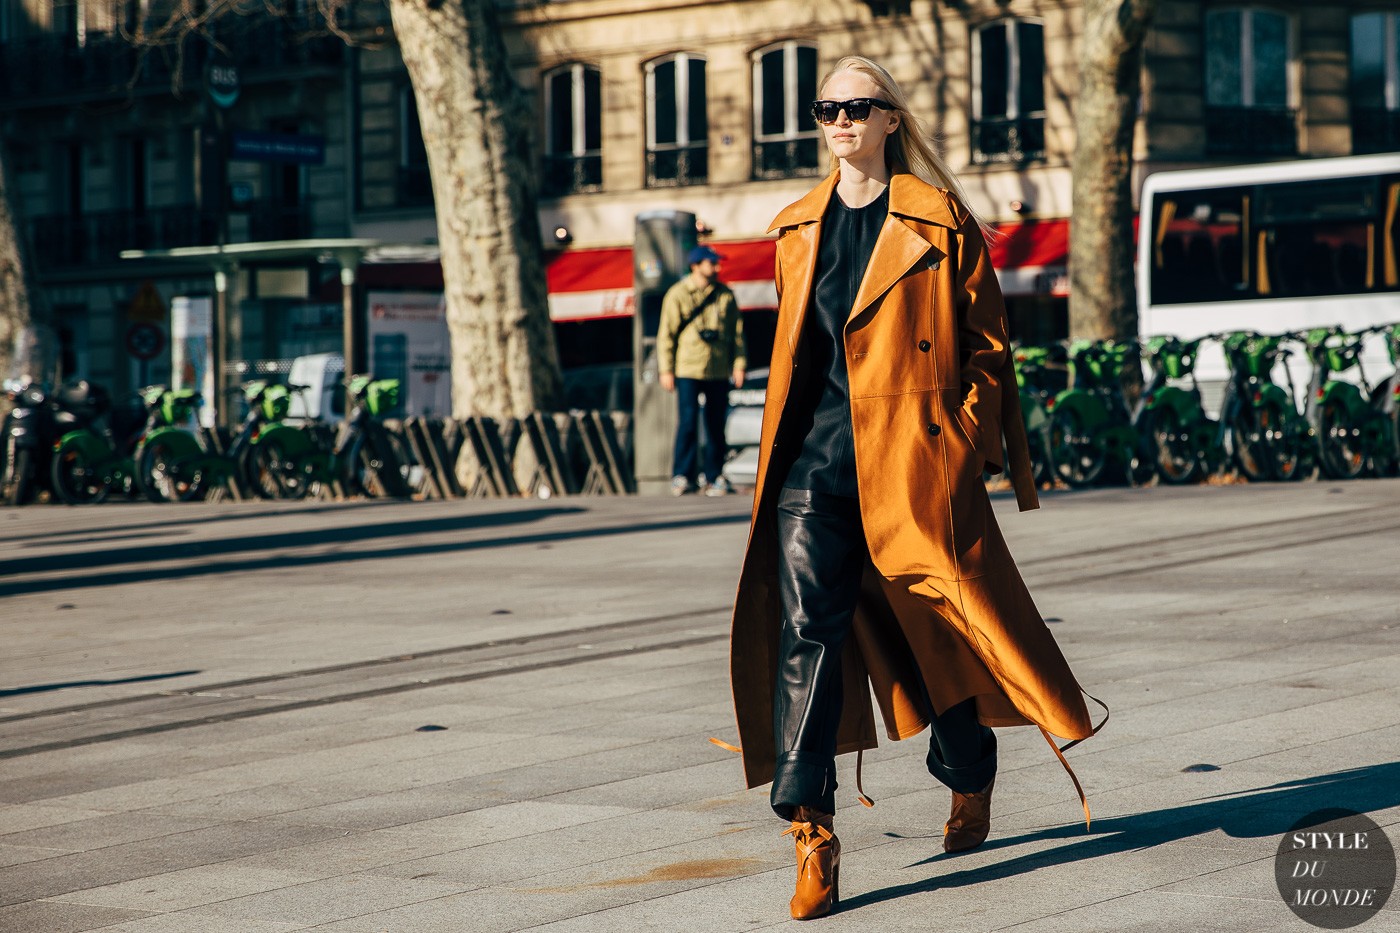 Paris Fall 19 day 3 by STYLEDUMONDE Street Style Fashion Photography20190227 48A7230